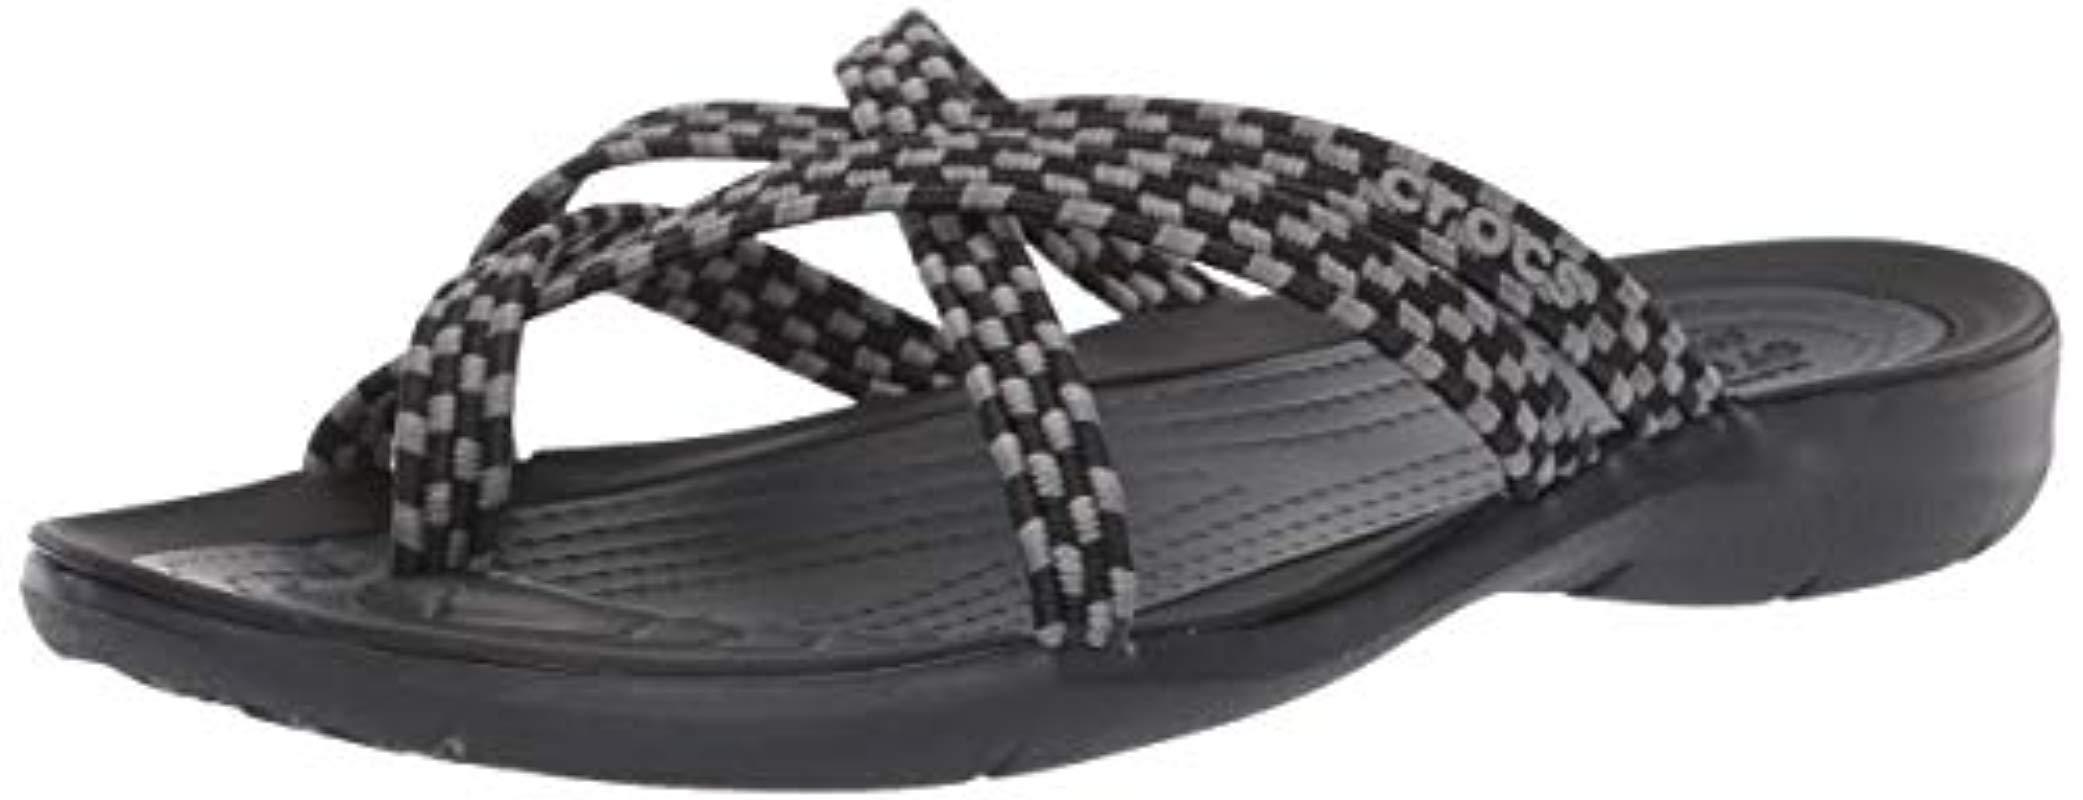 crocs swiftwater braided